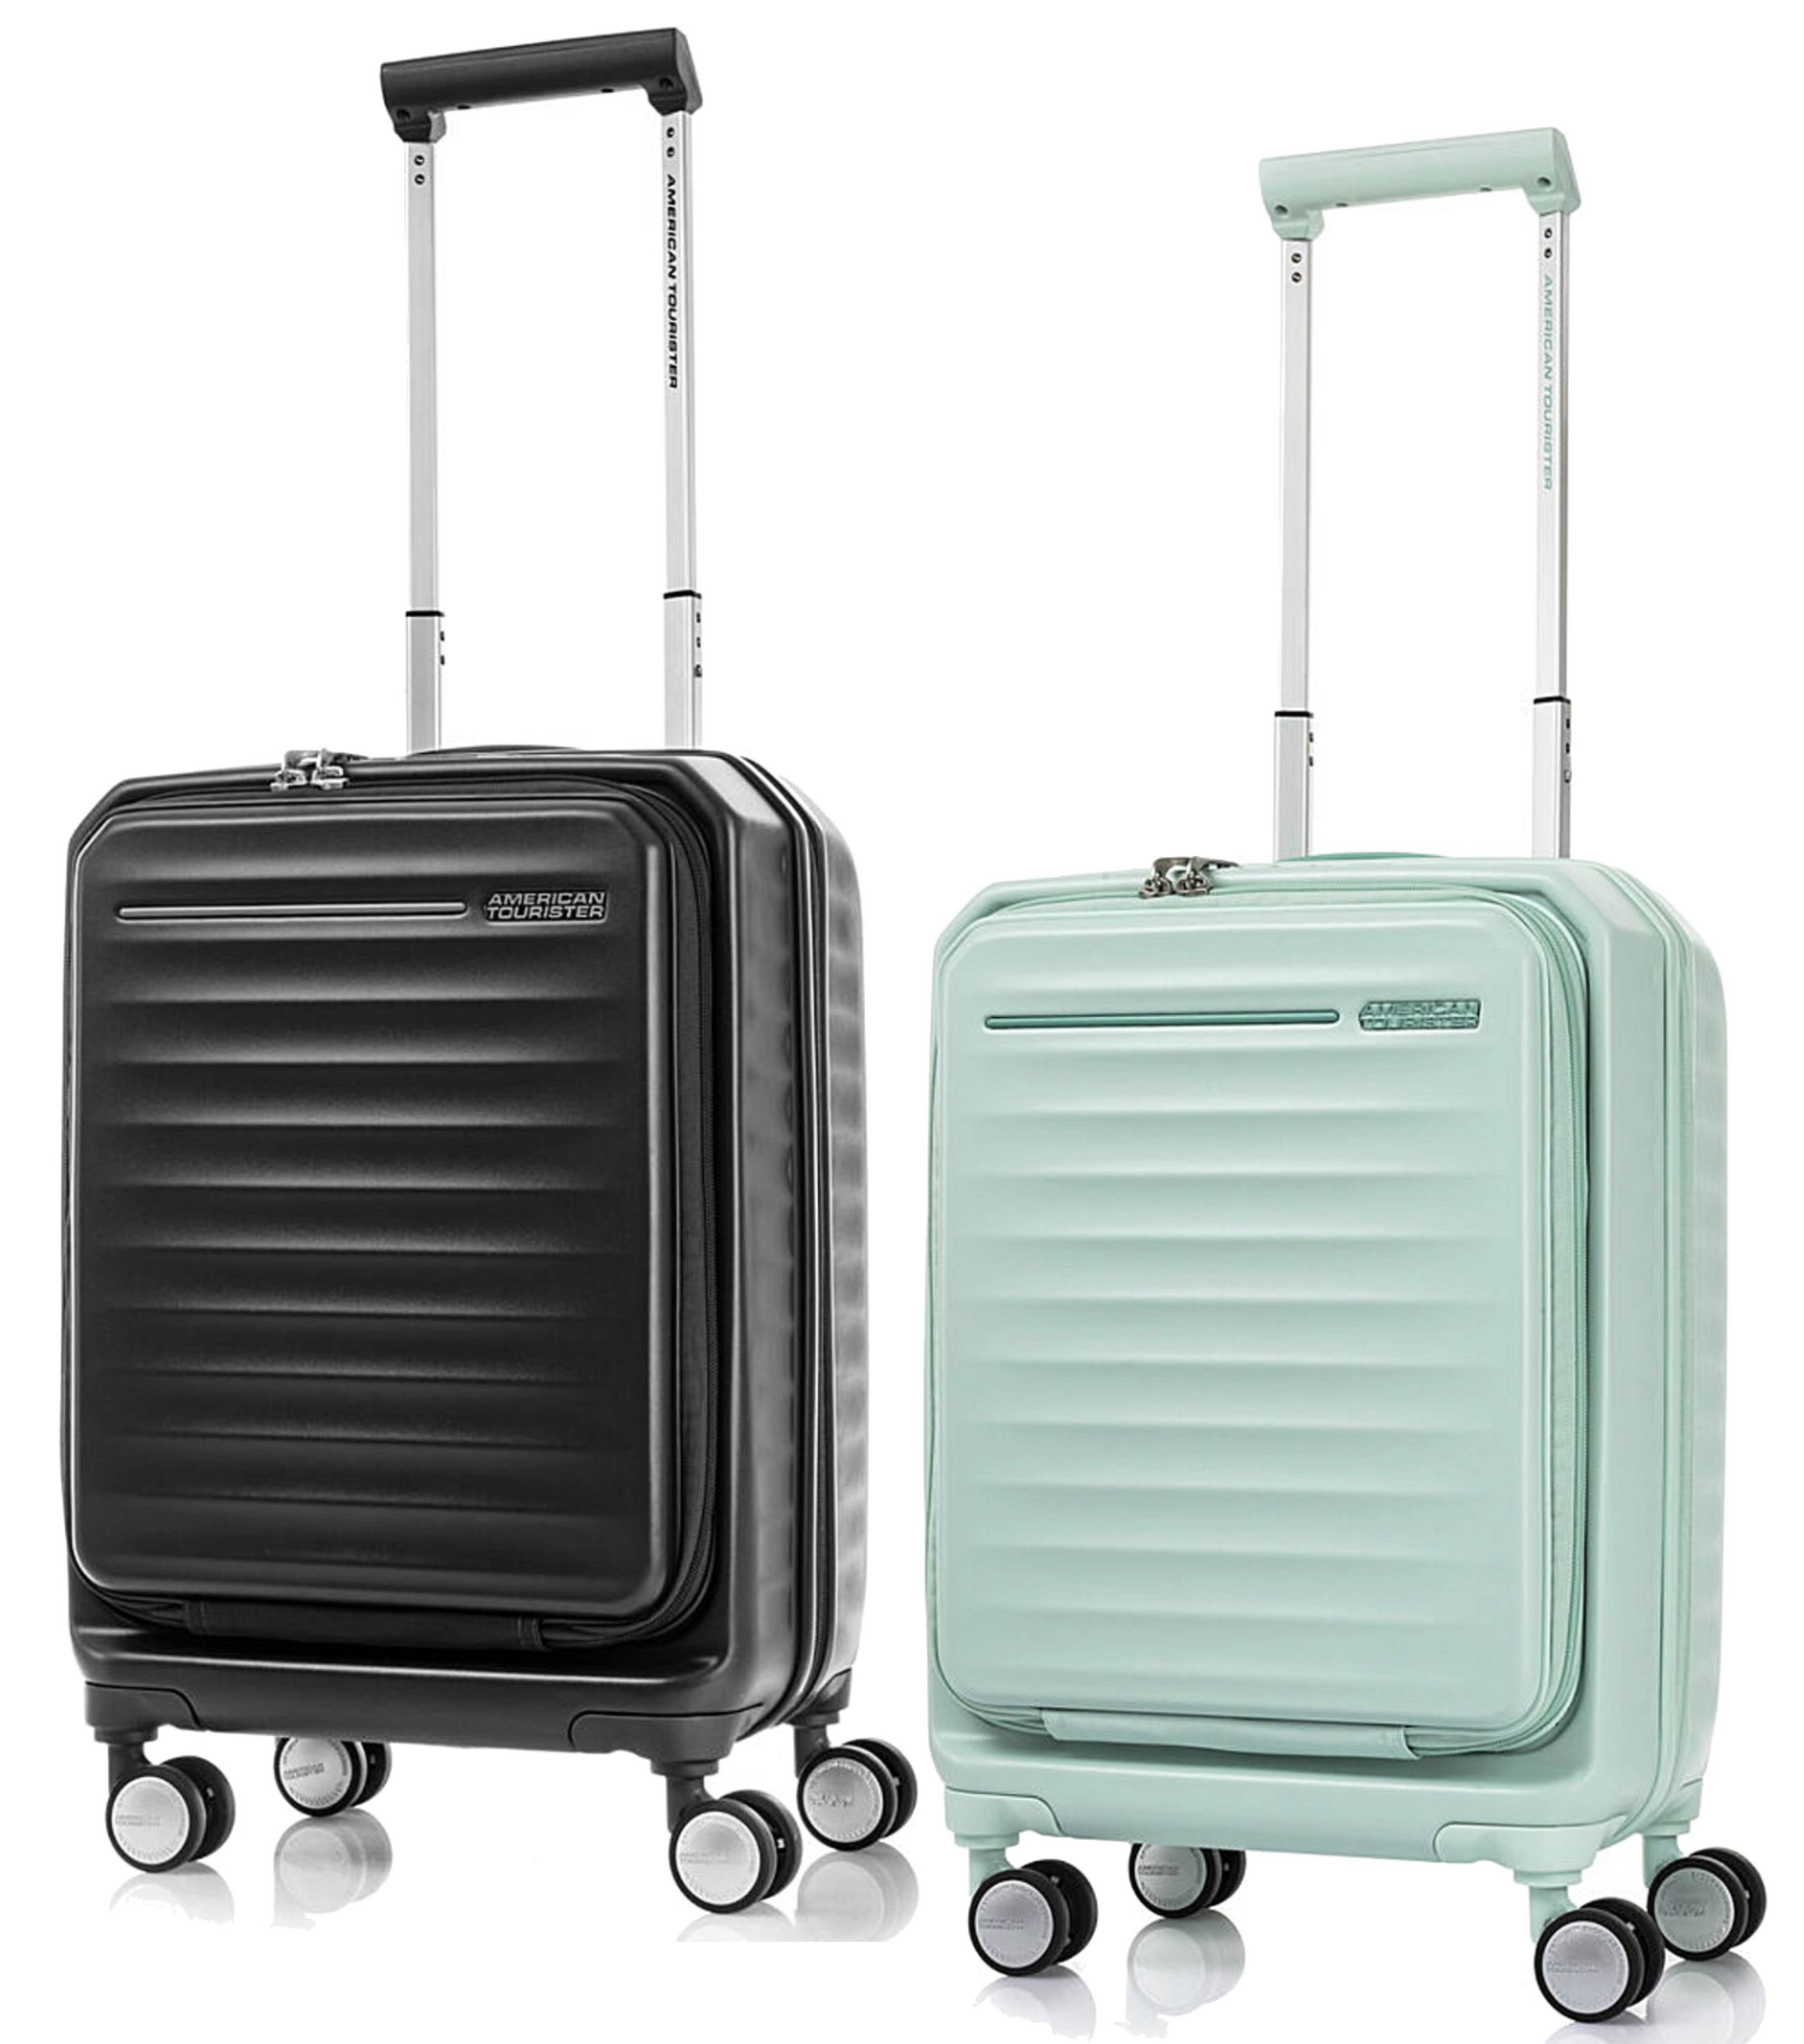 American Tourister Qatar - Luggages, Backpacks, Bags